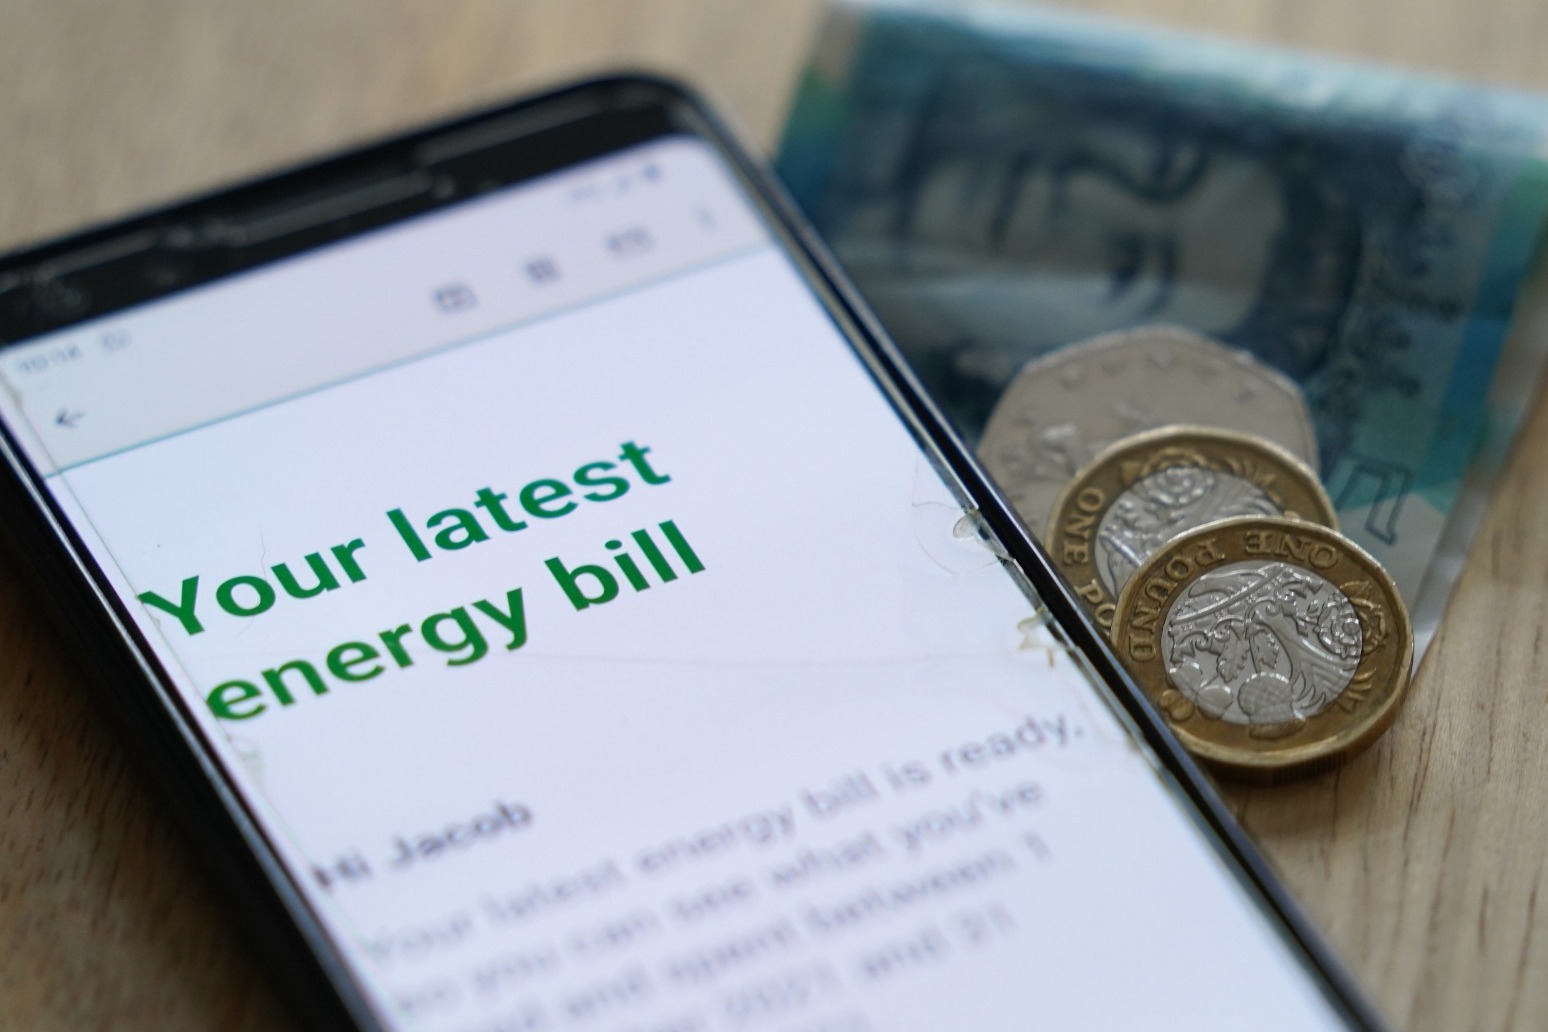 Domestic energy spend to top £100bn after October price rise, report estimates 